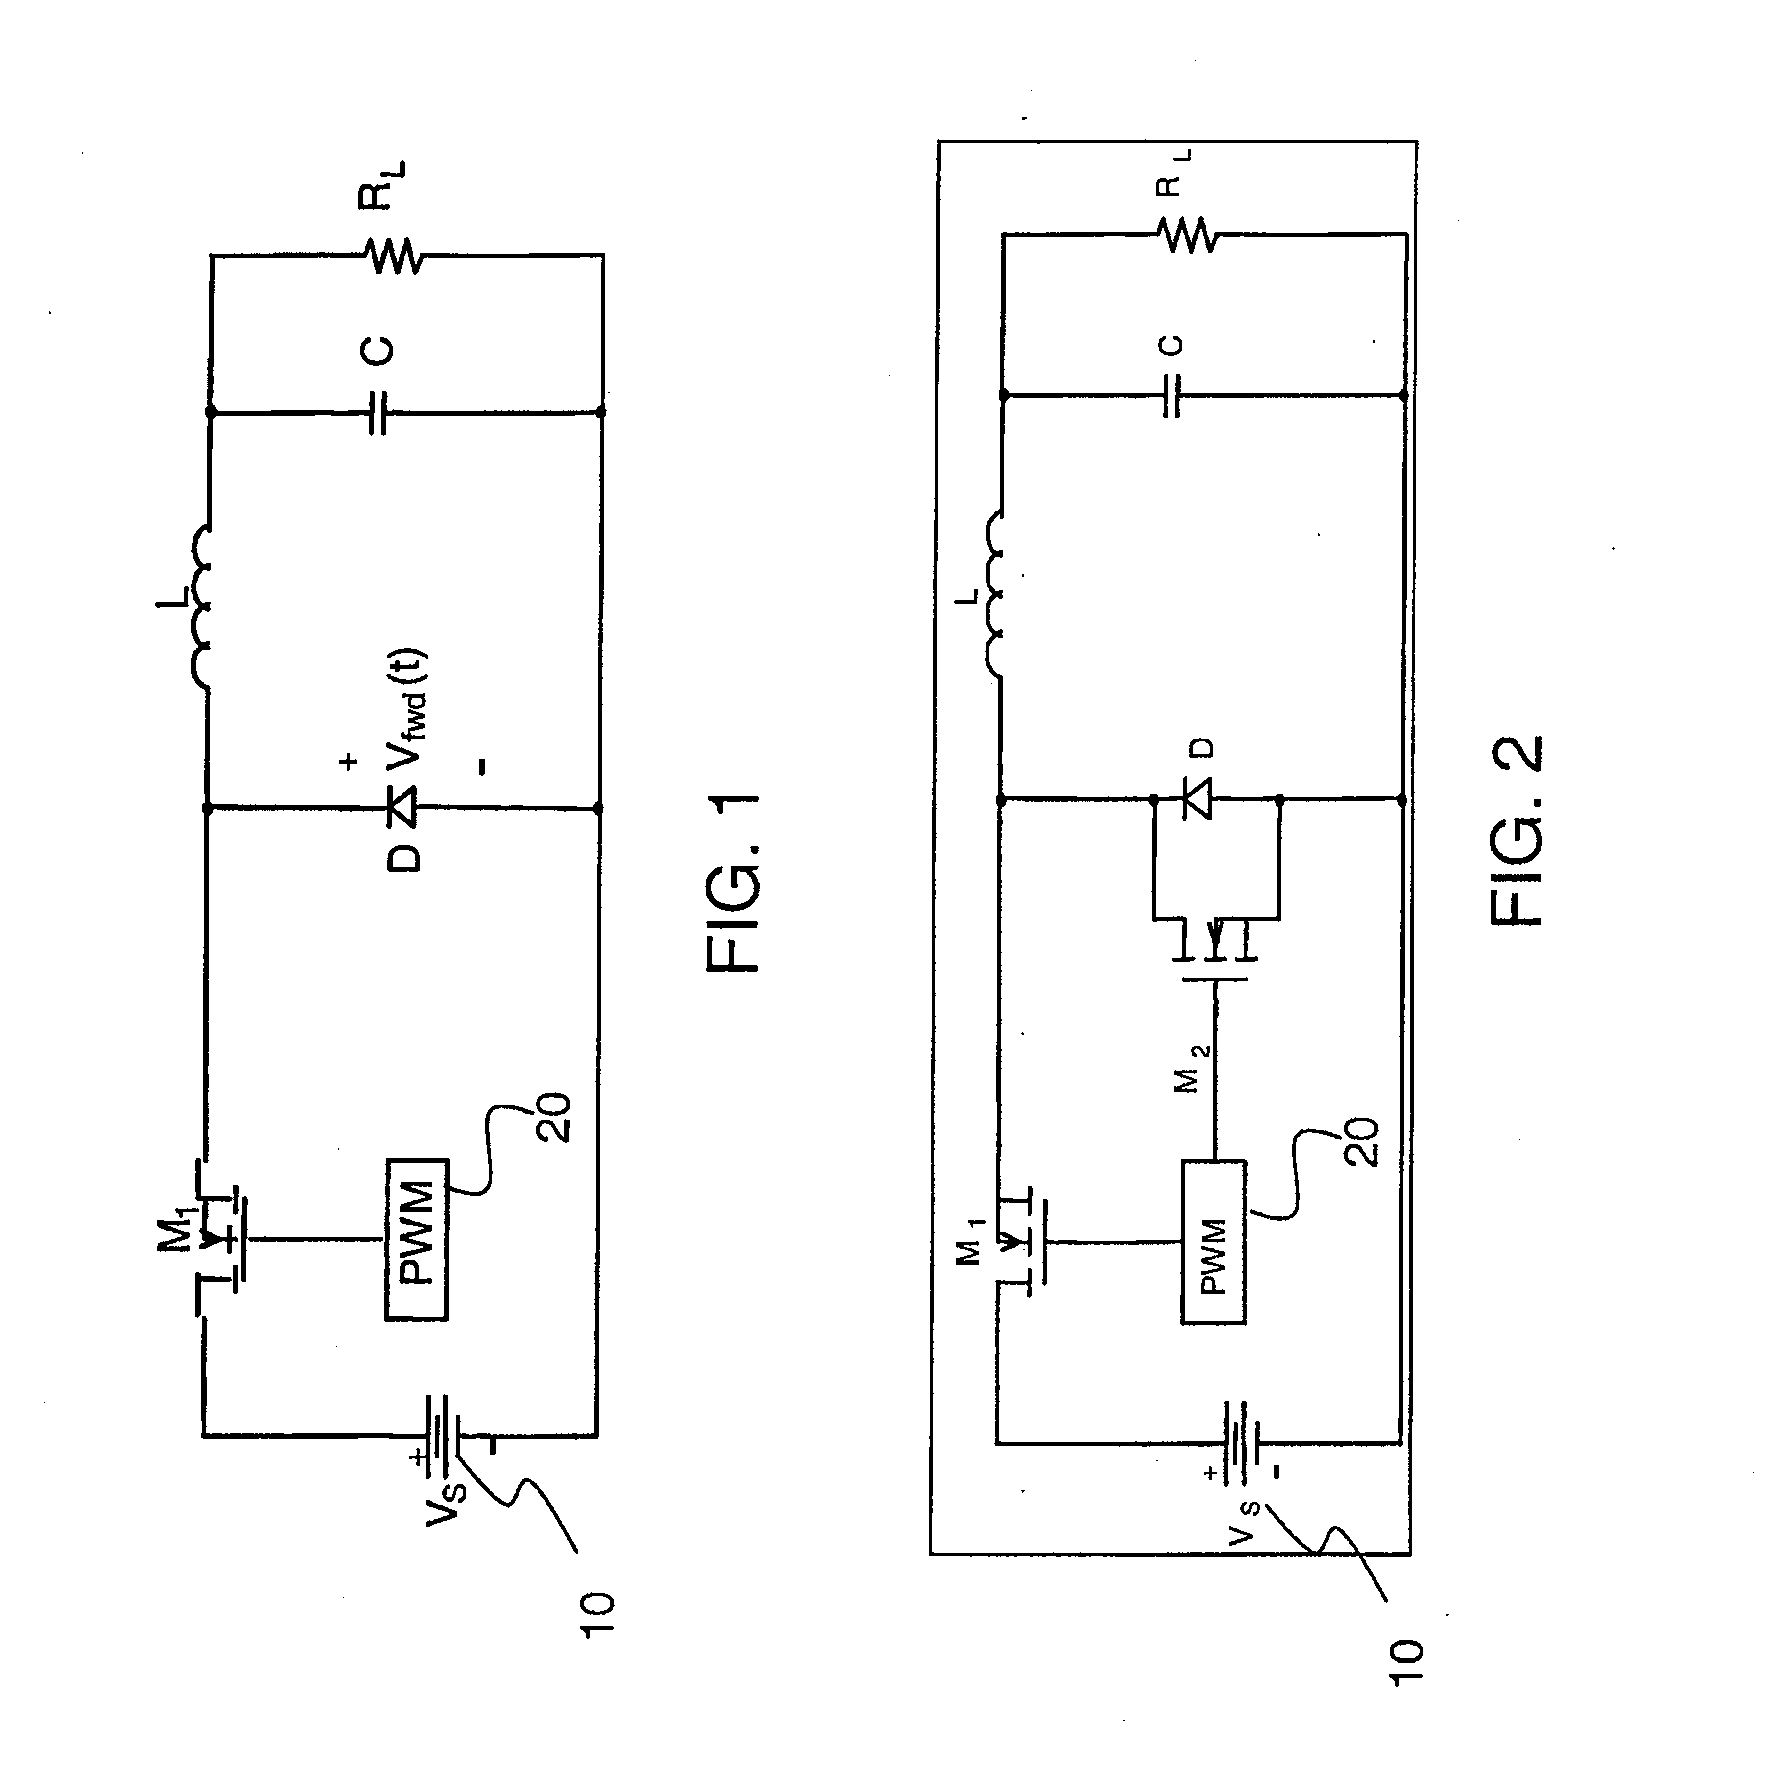 Distributed power conditioning with dc-dc converters implemented in heterogeneous integrated circuit